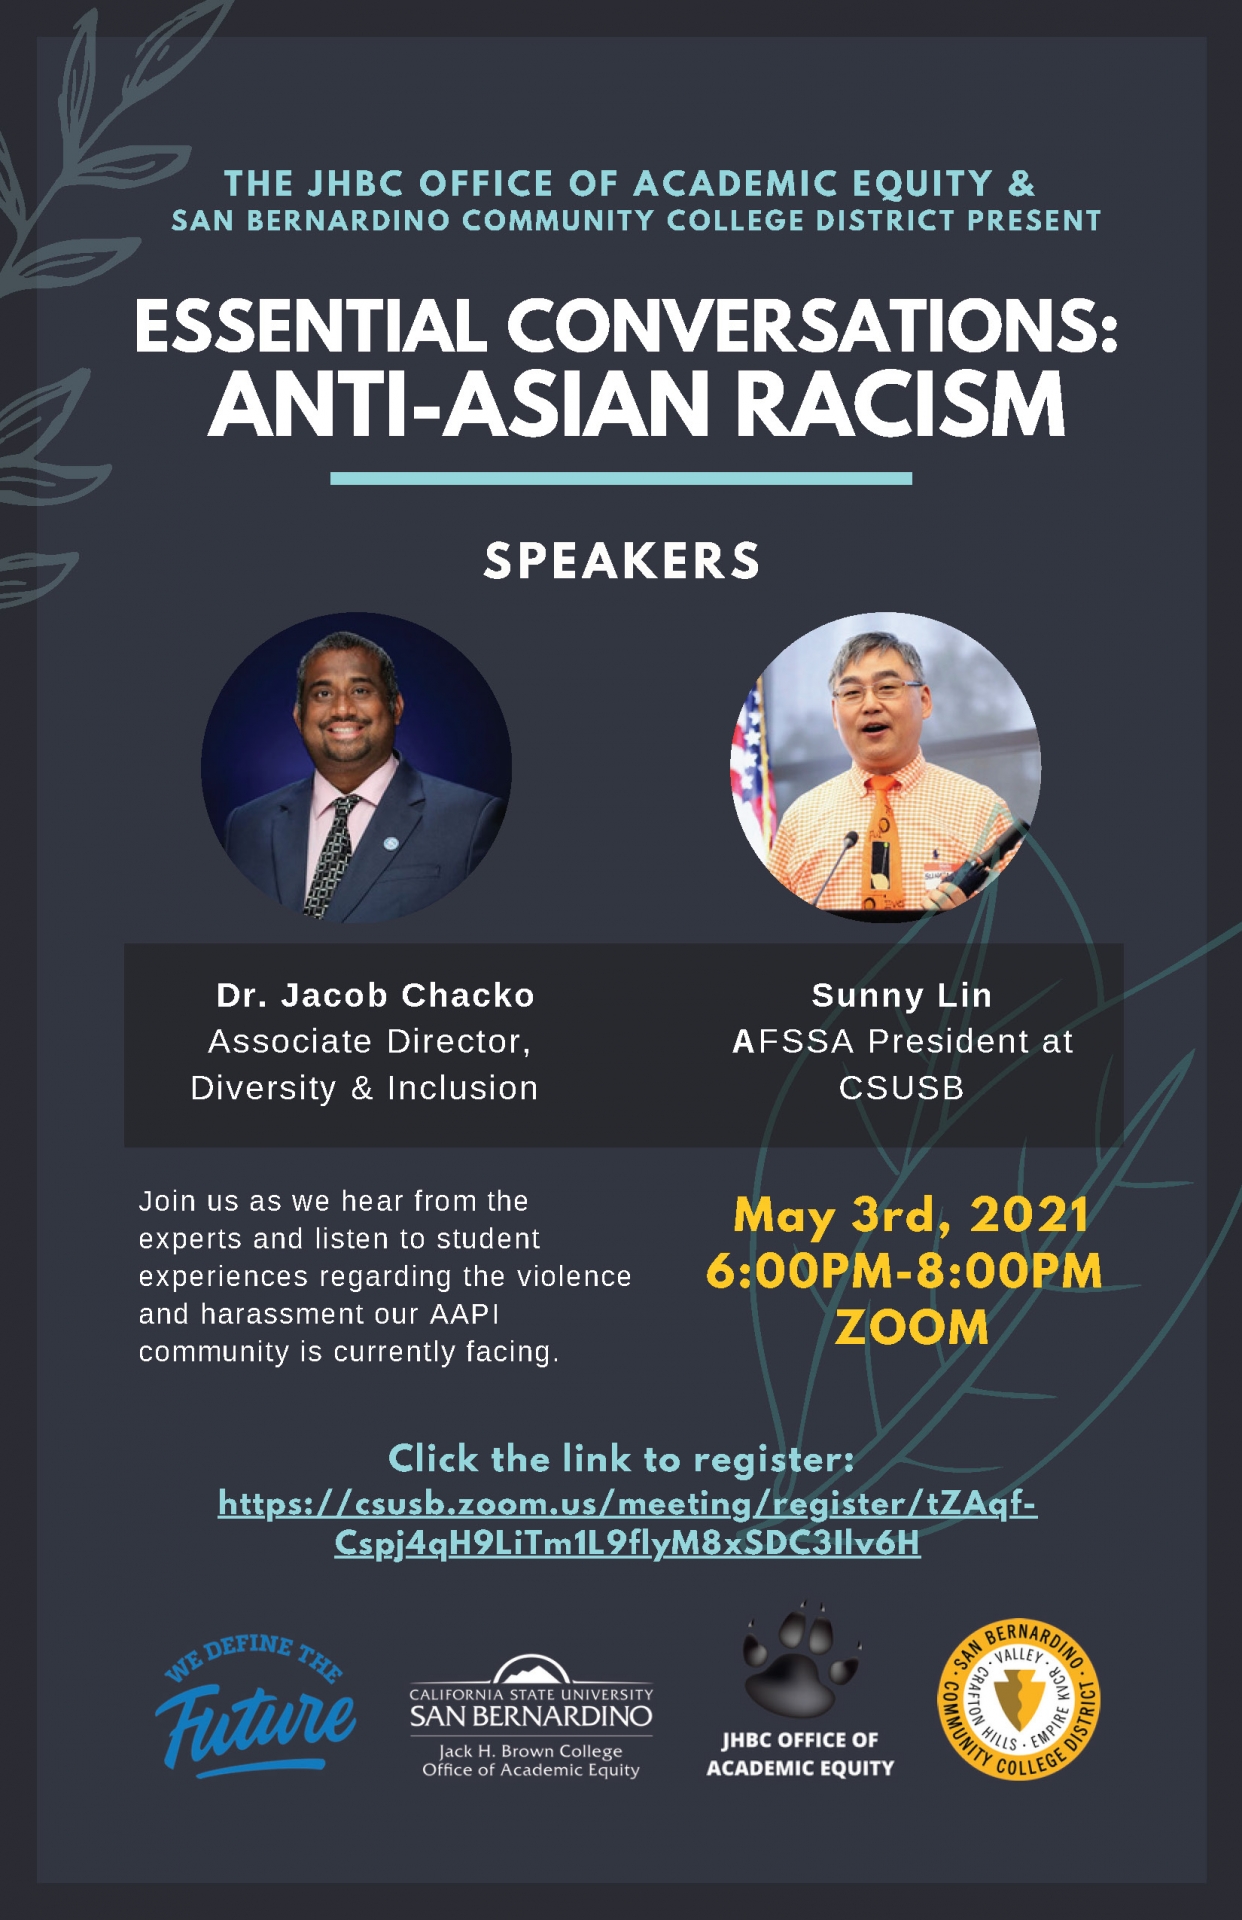 Event flier for “Essential Conversations: Anti-Asian Racism,” May 3